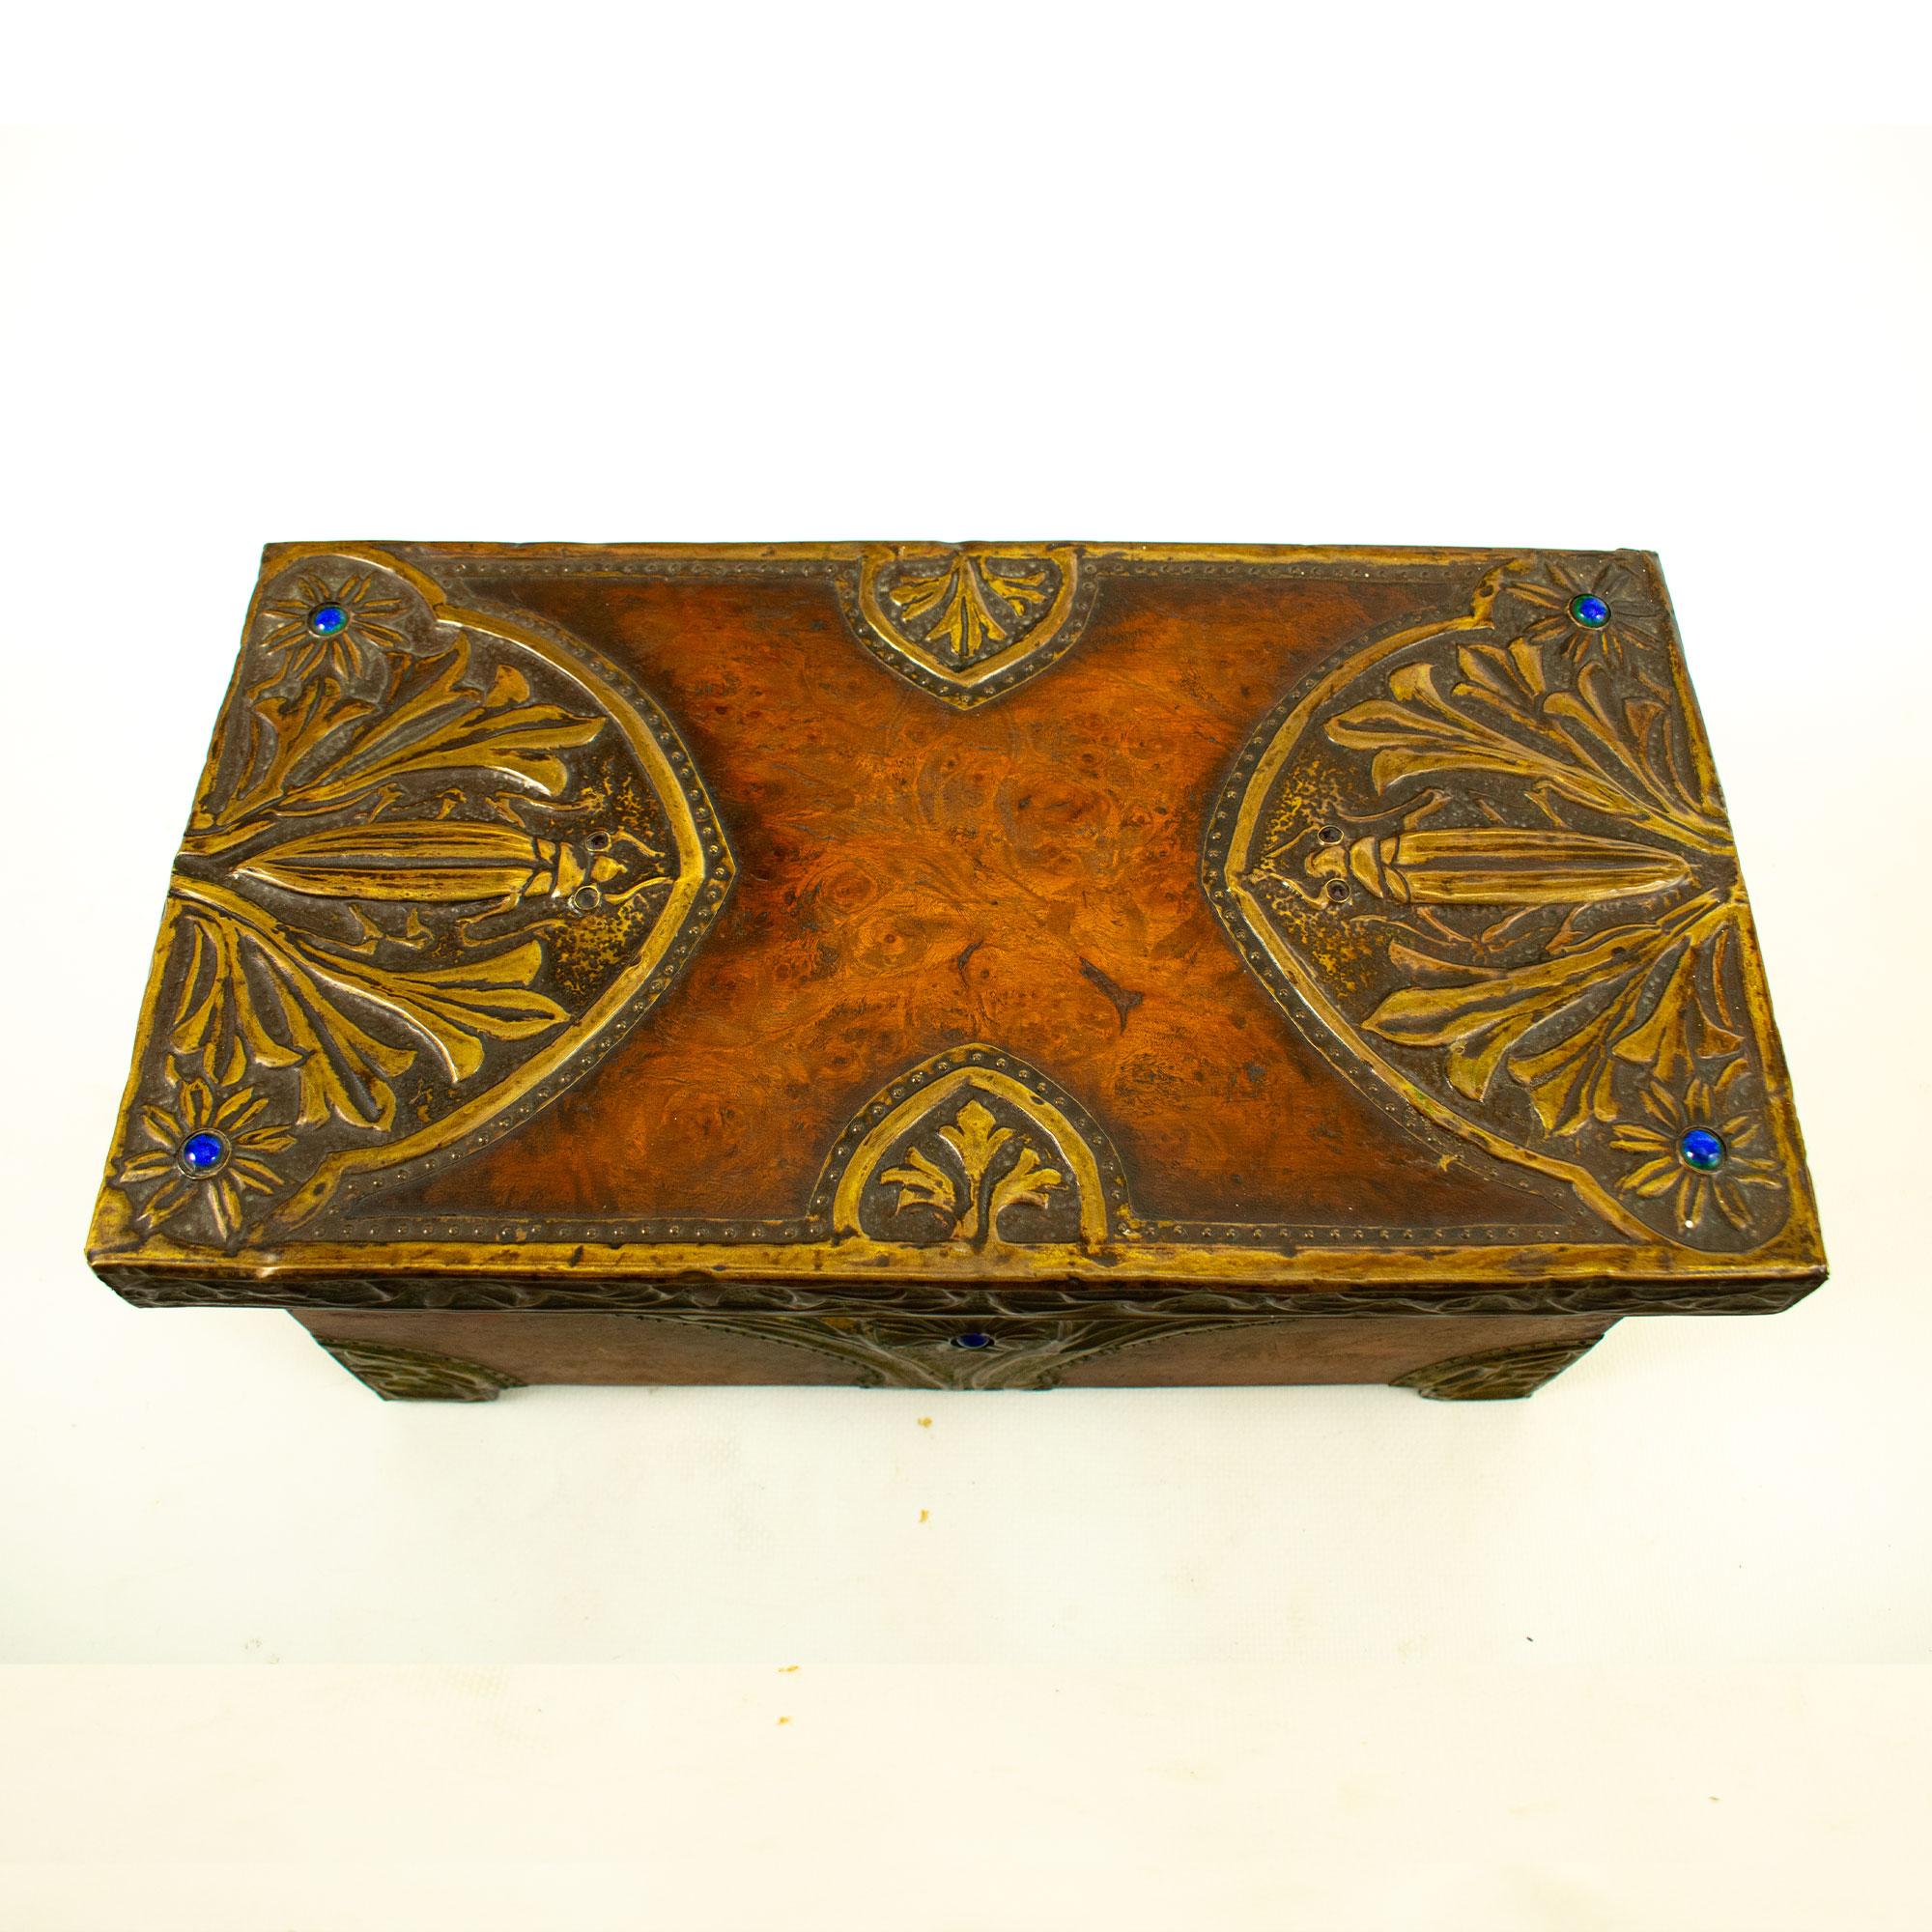 Very pretty rectangular walnut chest with embossed bronze decoration in the Art Nouveau style, depicting scrolls, scarab beetles, foliage and flowers - a typical organic style which was prominent in the Art Nouveau period. The pistils and detail